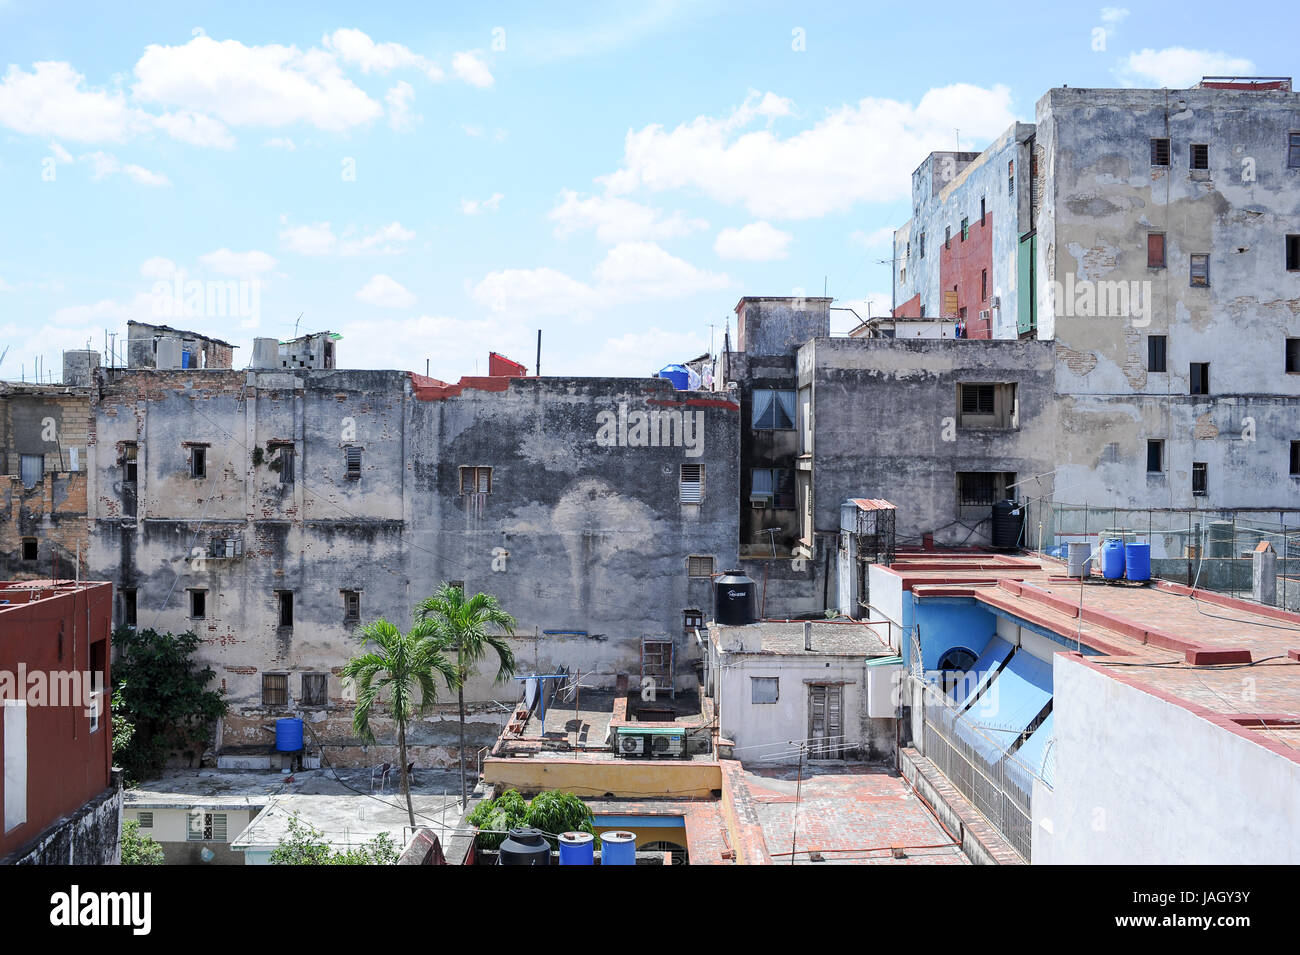 Scenic view of crumbling buildings in havana from the famous terrace of La Guarida restaurant Stock Photo